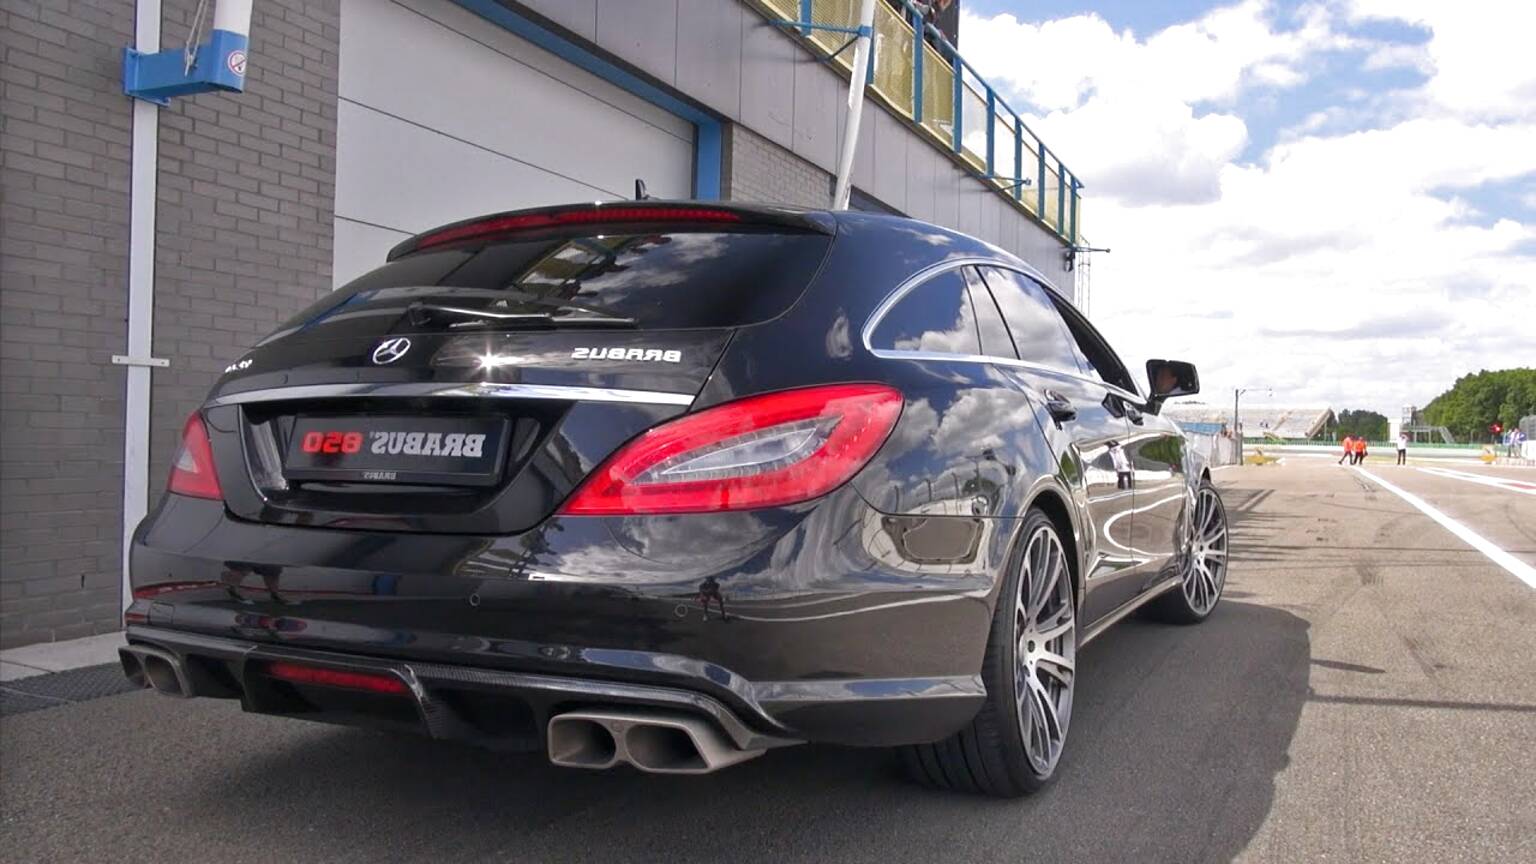 Mercedes Cls Brabus for sale in UK View 59 bargains